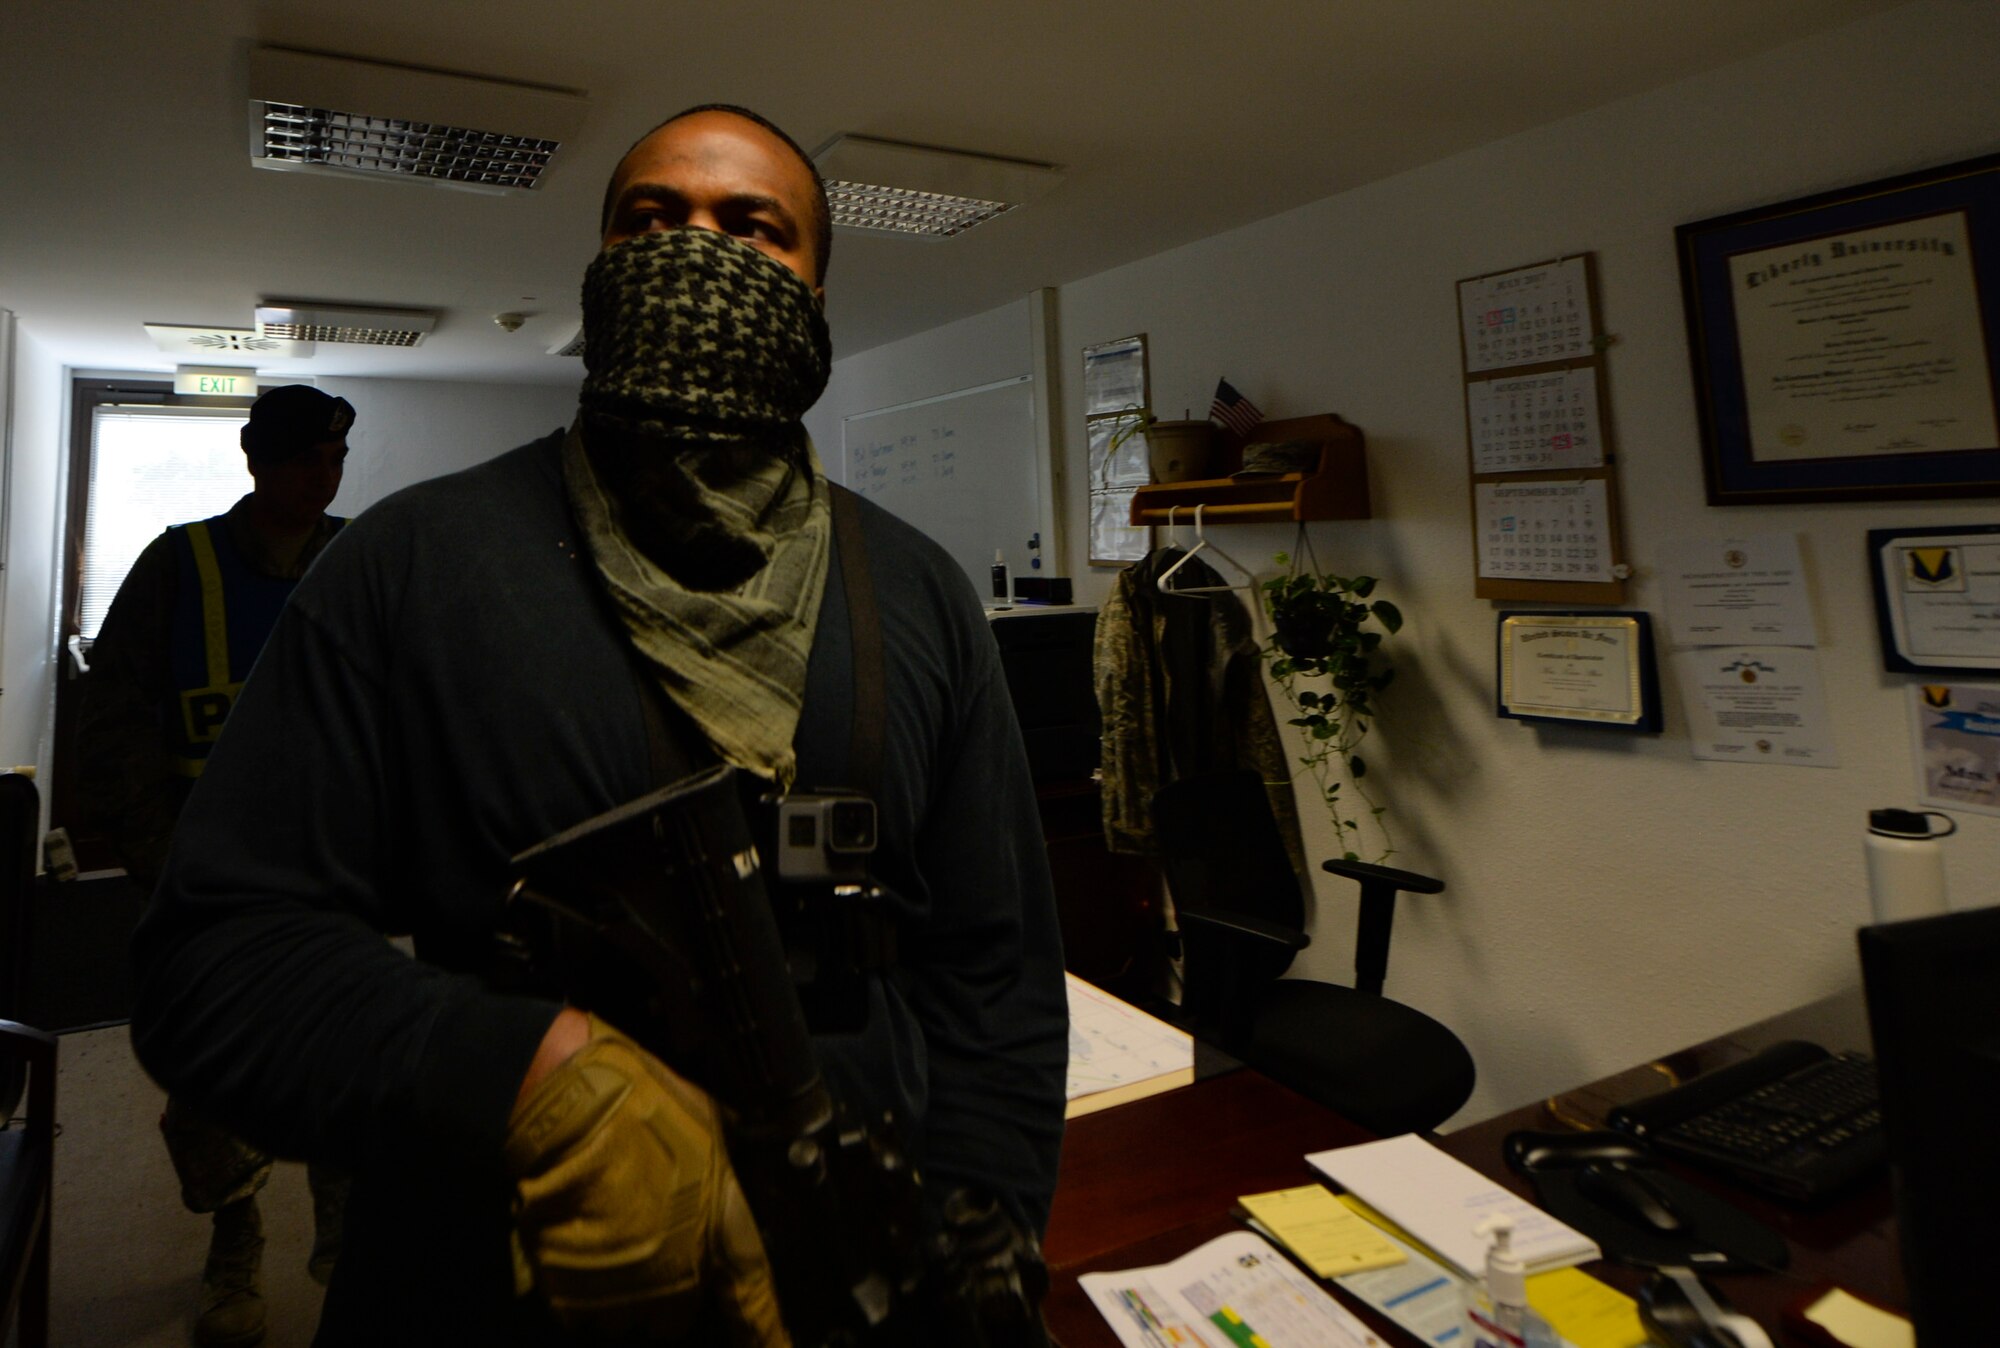 U.S. Air Force Staff Sgt. Antonio Lofton, 86th Security Forces Squadron instructor, simulates being an active shooter during an exercise at the 86th Maintenance Group on Ramstein Air Base, Germany, July 12, 2017. Multiple organizations such as command post and security forces are notified prior to the exercise to practice emergency procedures. (U.S. Air Force photo by Staff Sgt. Nesha Humes)